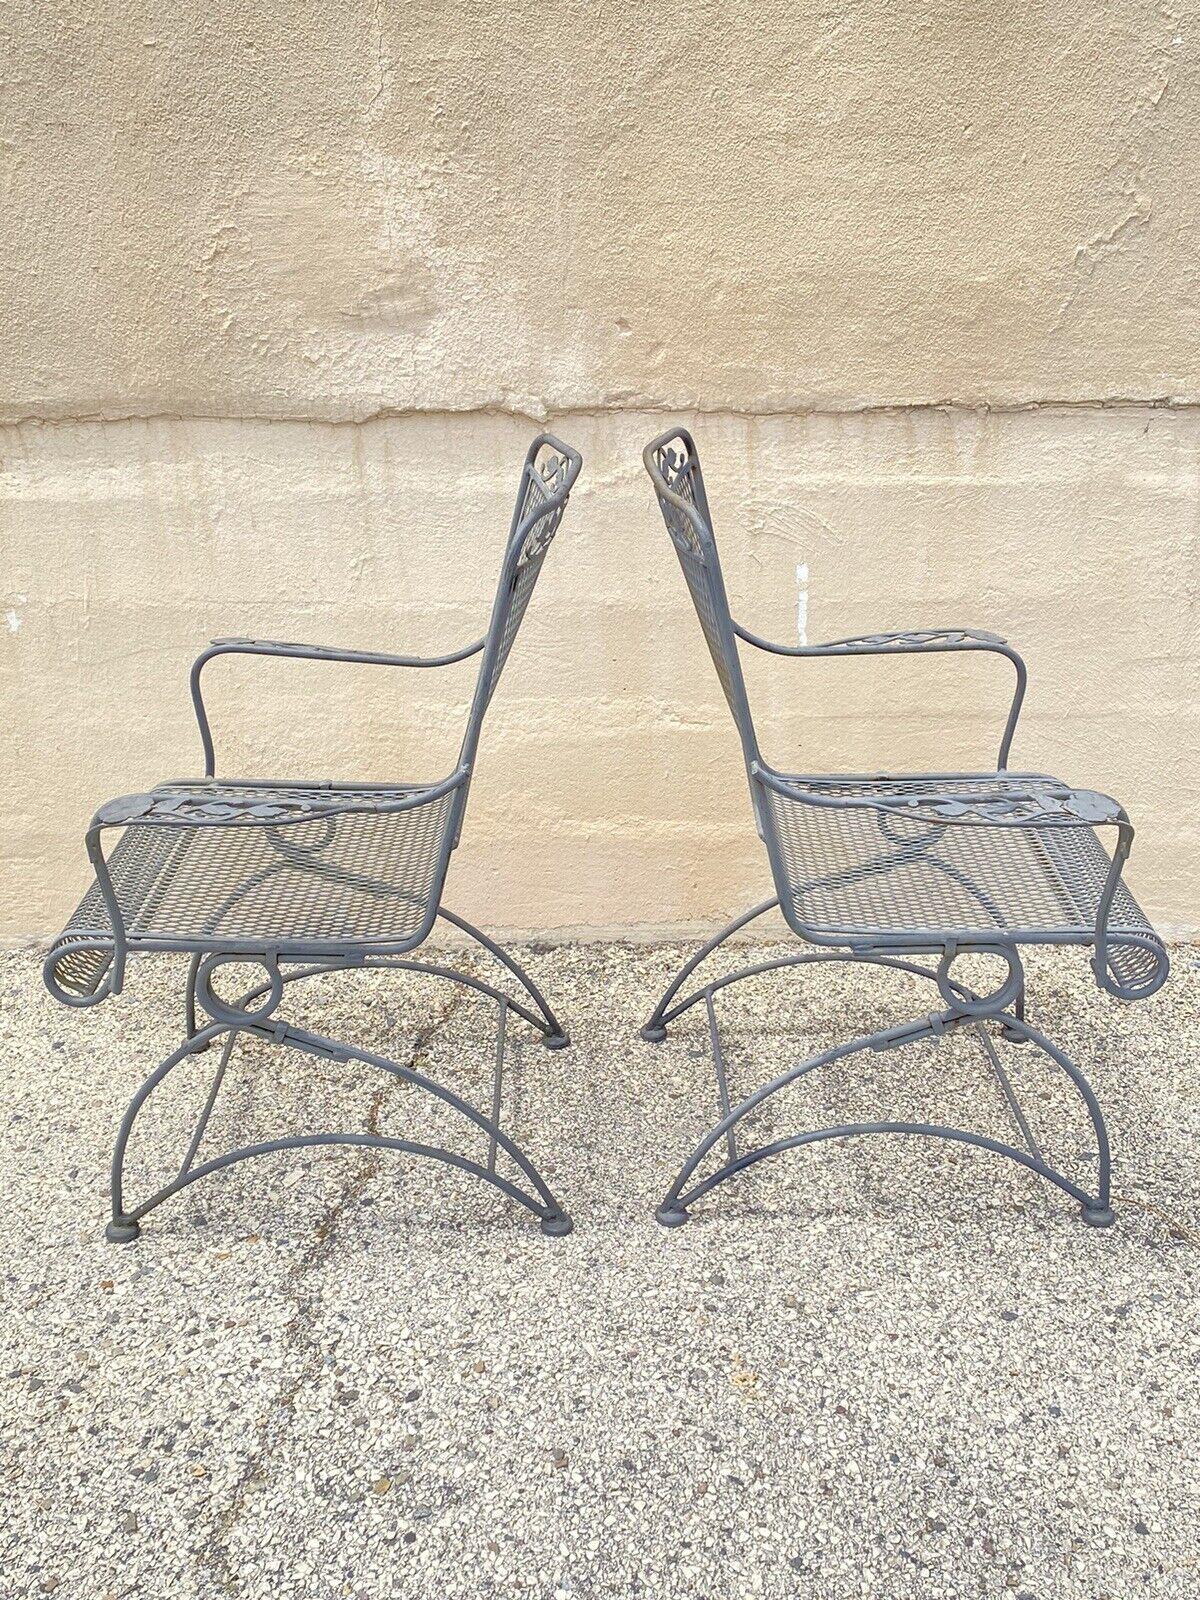 Vintage Meadowcraft Dogwood Coil Spring Wrought Iron Garden Patio Chair, a Pair 5